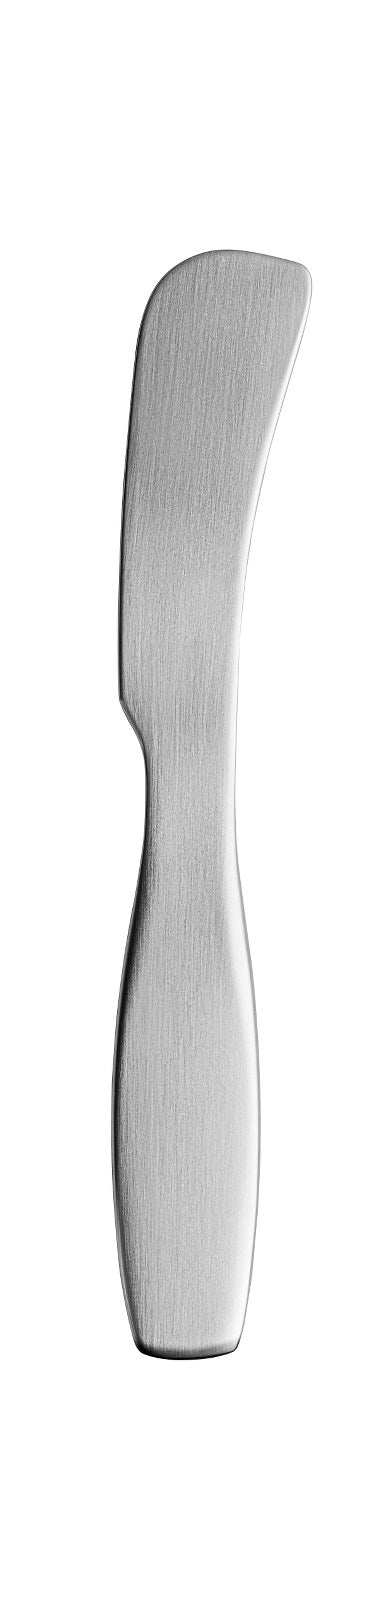 product image for Collective Tools Flatware design by Antonio Citterio for Iittala 65